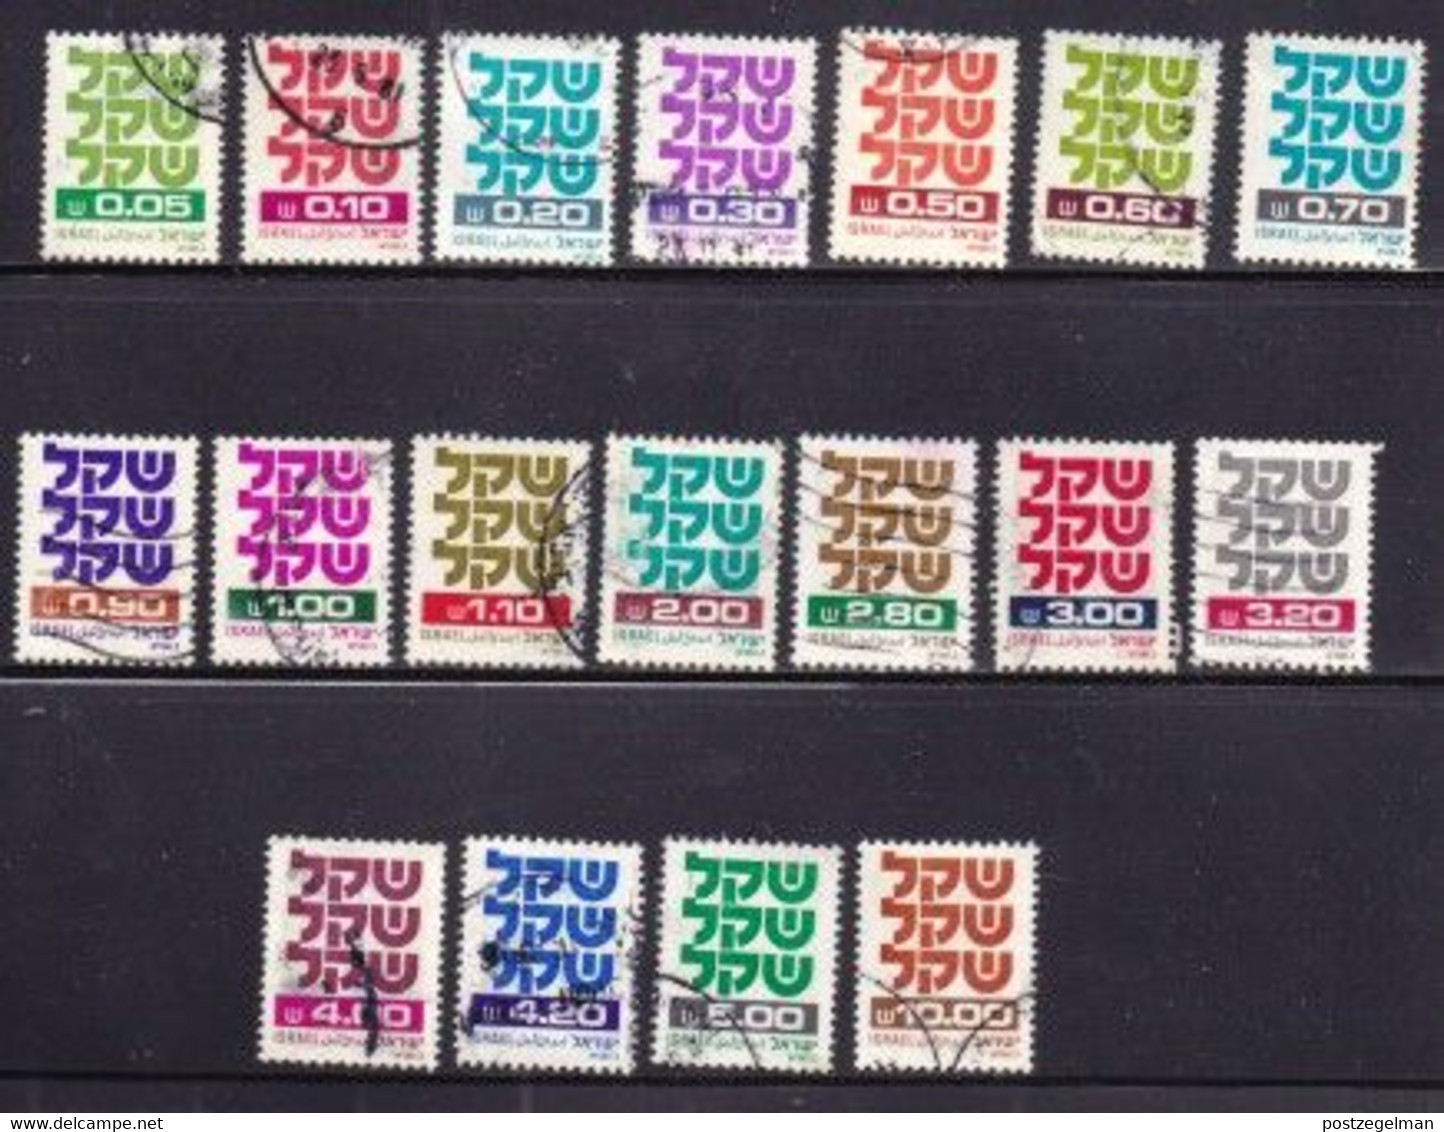 ISRAEL, 1980, Used Stamp(s)  Without  Tab, Shekel, SG Number(s) 784-802a, Scannr. 19206, 18 Values Only - Usados (con Tab)